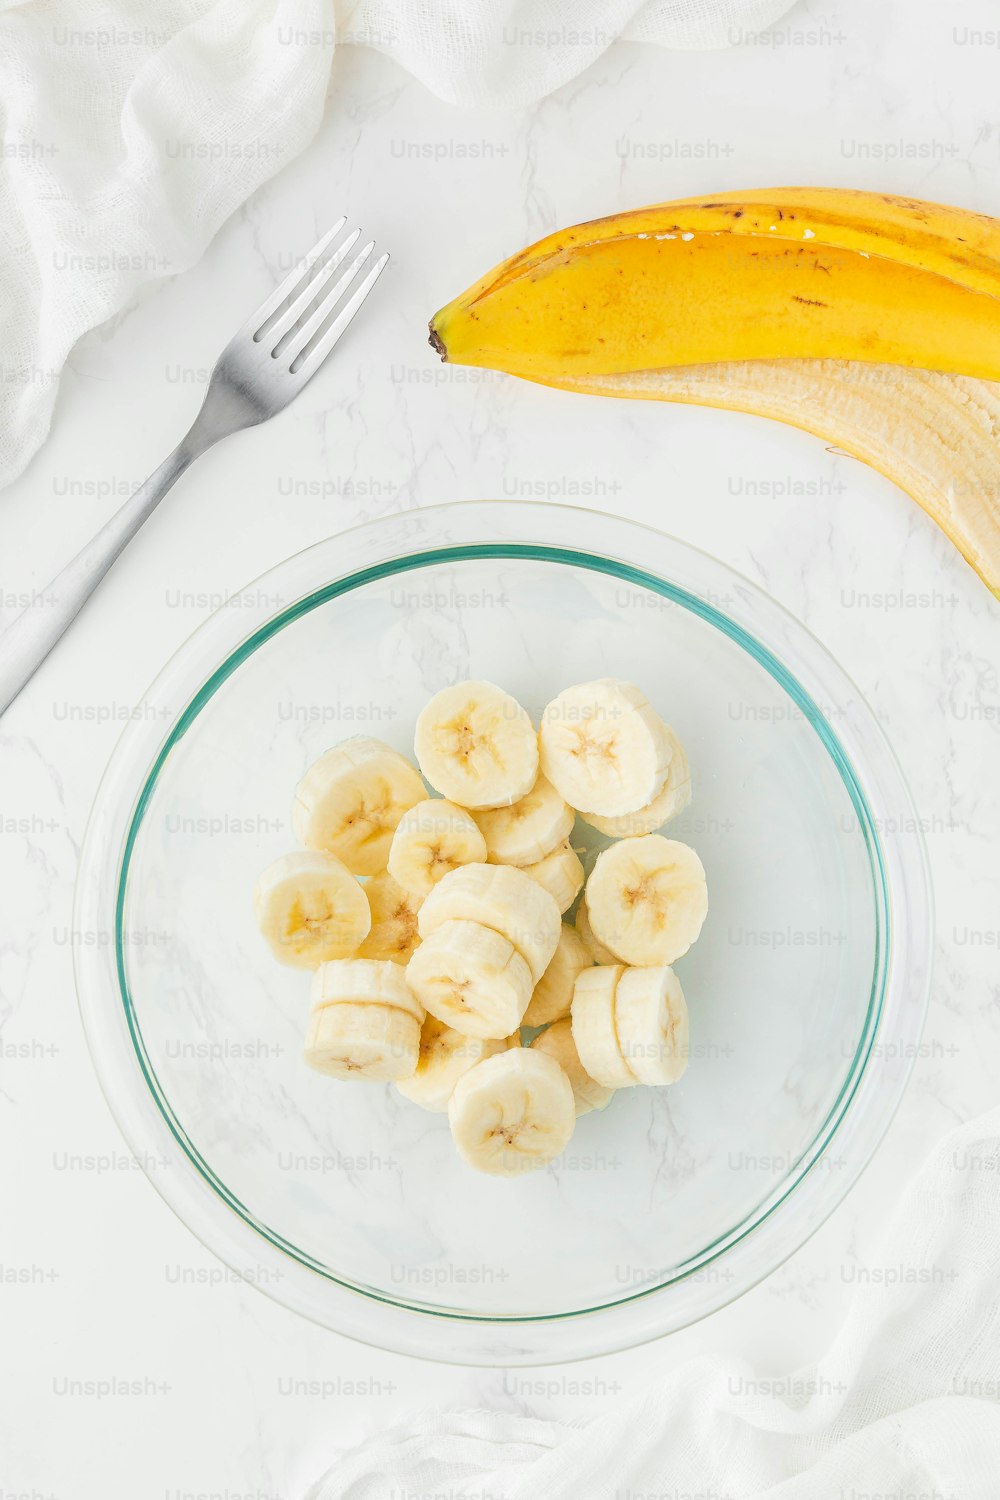 a plate of bananas and a fork